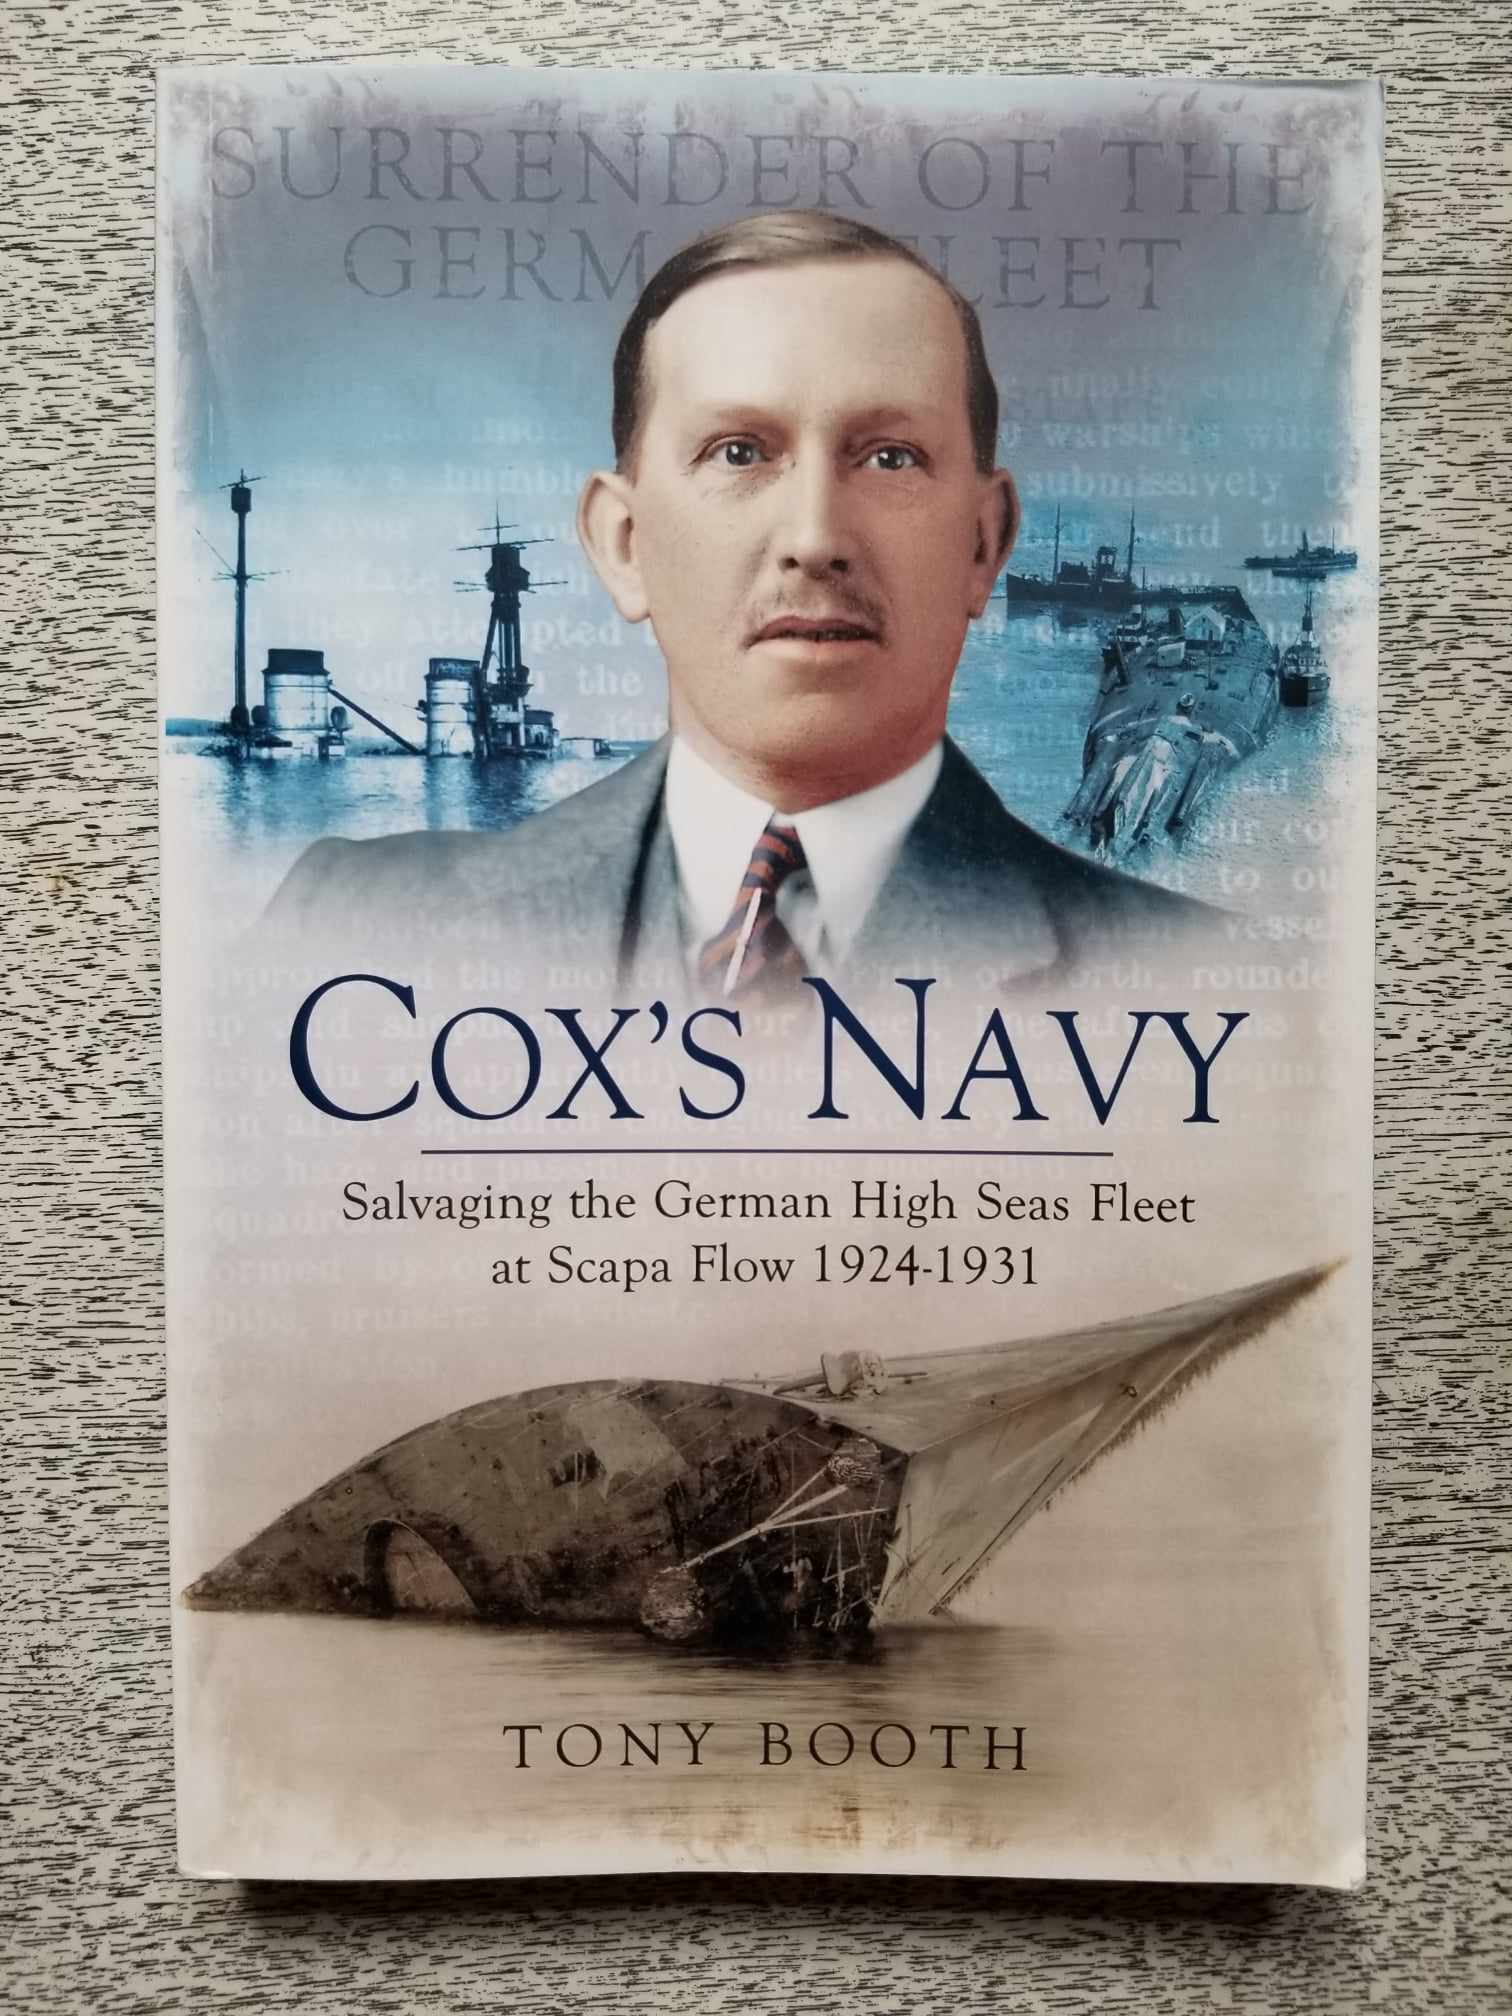 Cox's Navy: Salvaging the German High Seas Fleet at Scapa Flow 1924-1931 by Tony Booth